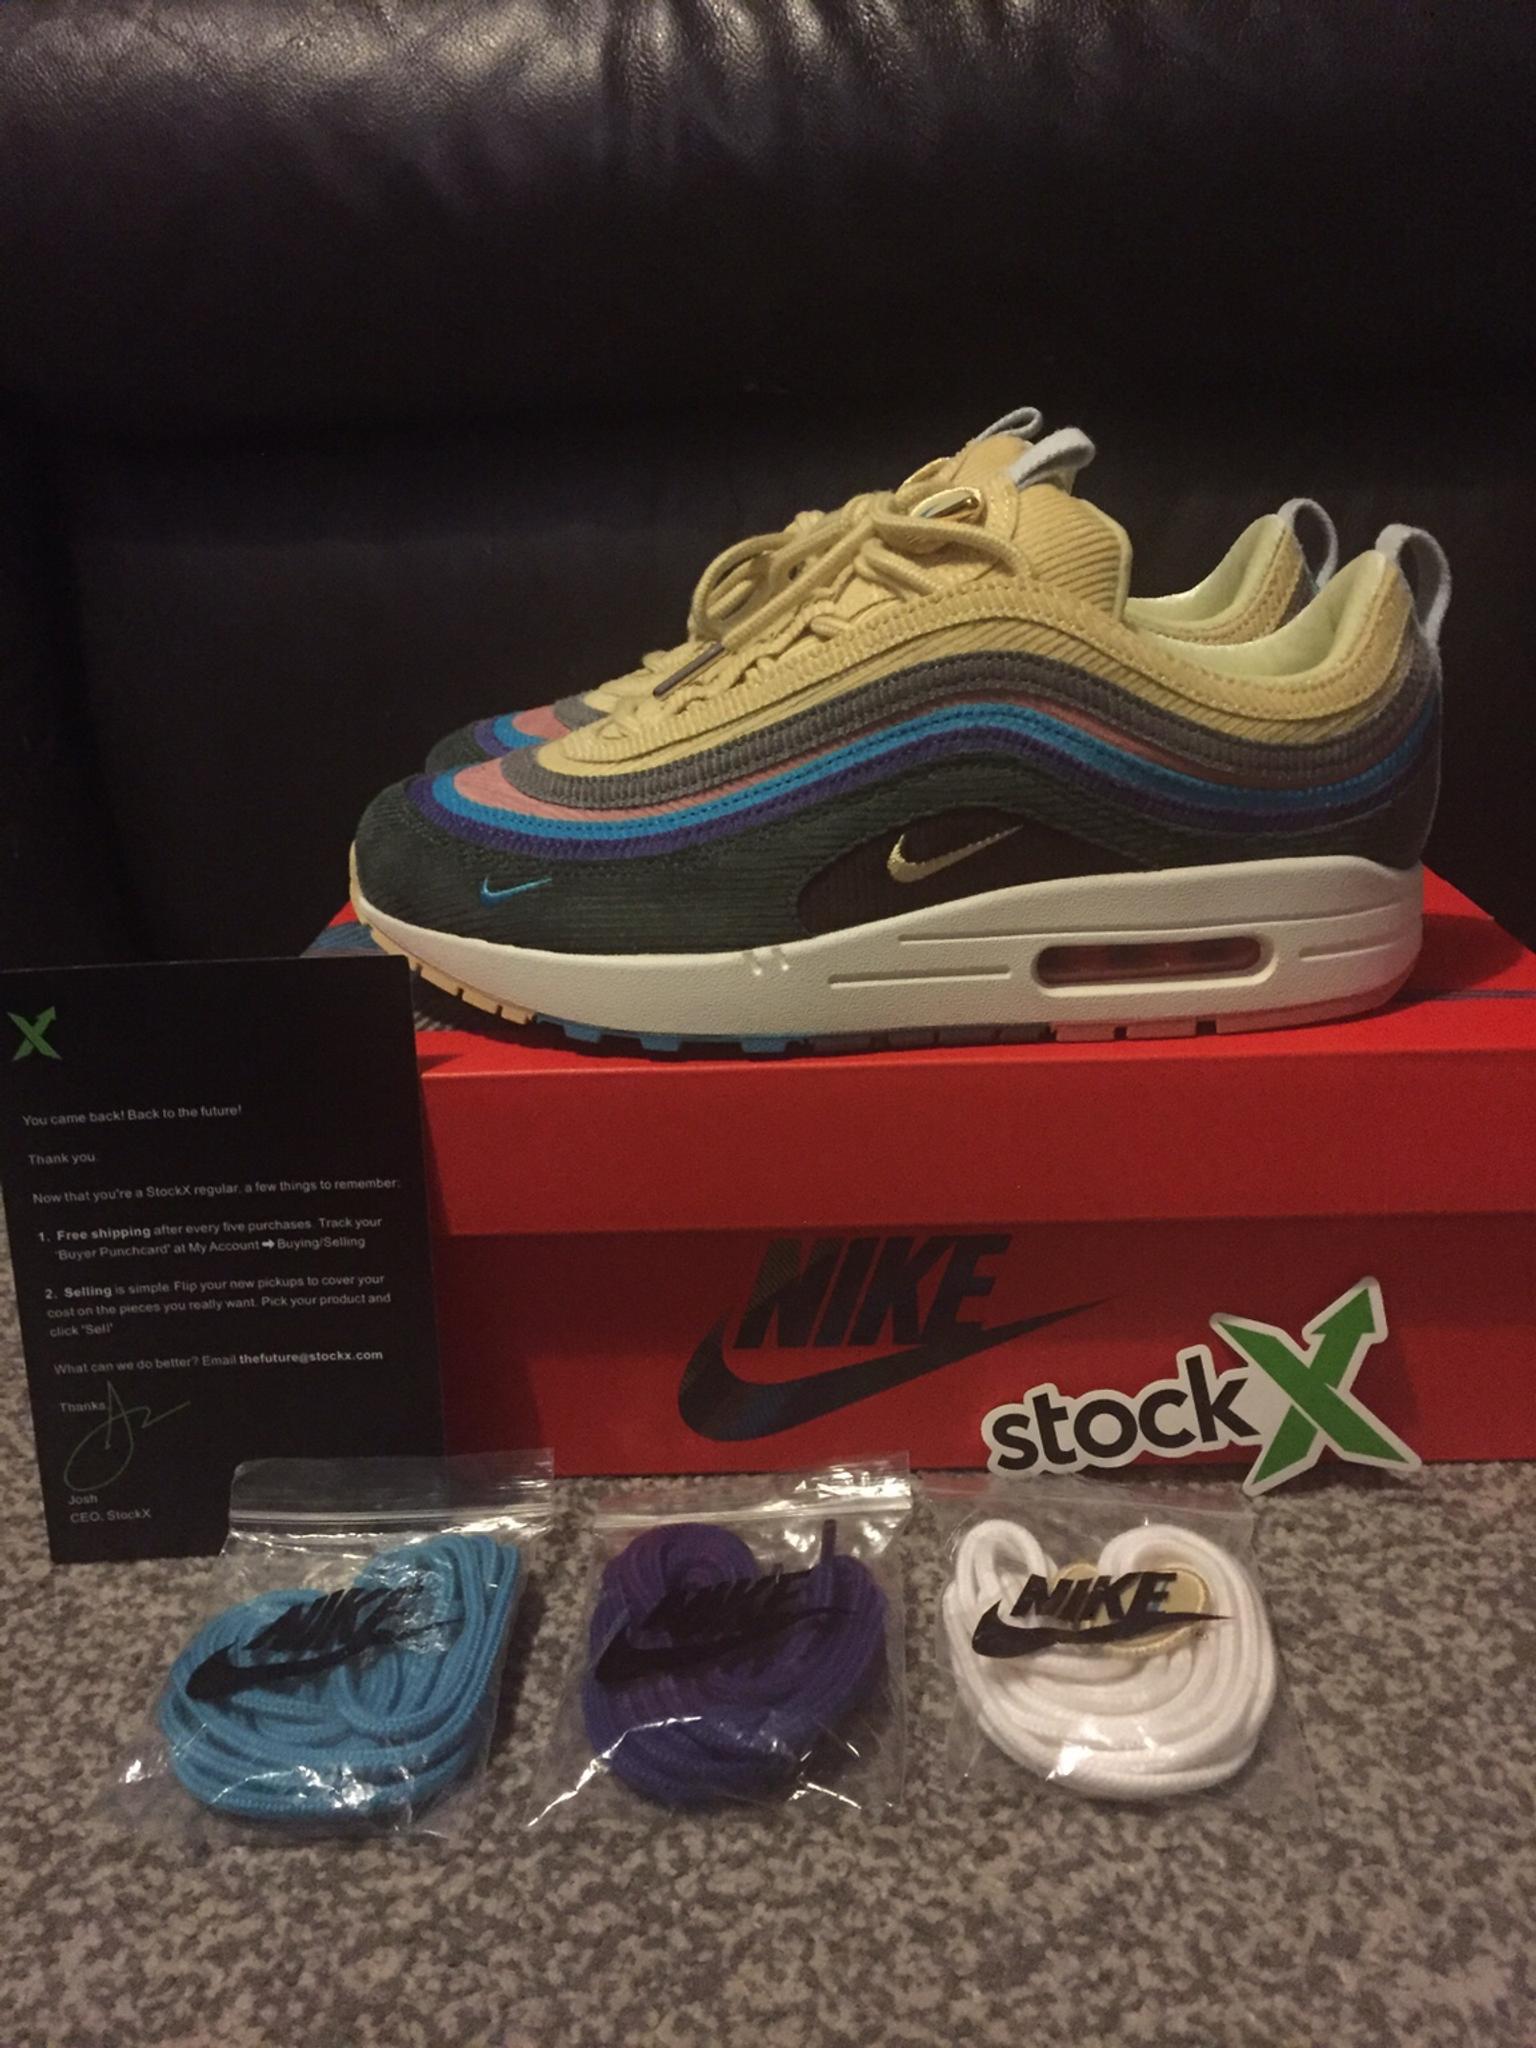 nike air max 97 wotherspoon stockx